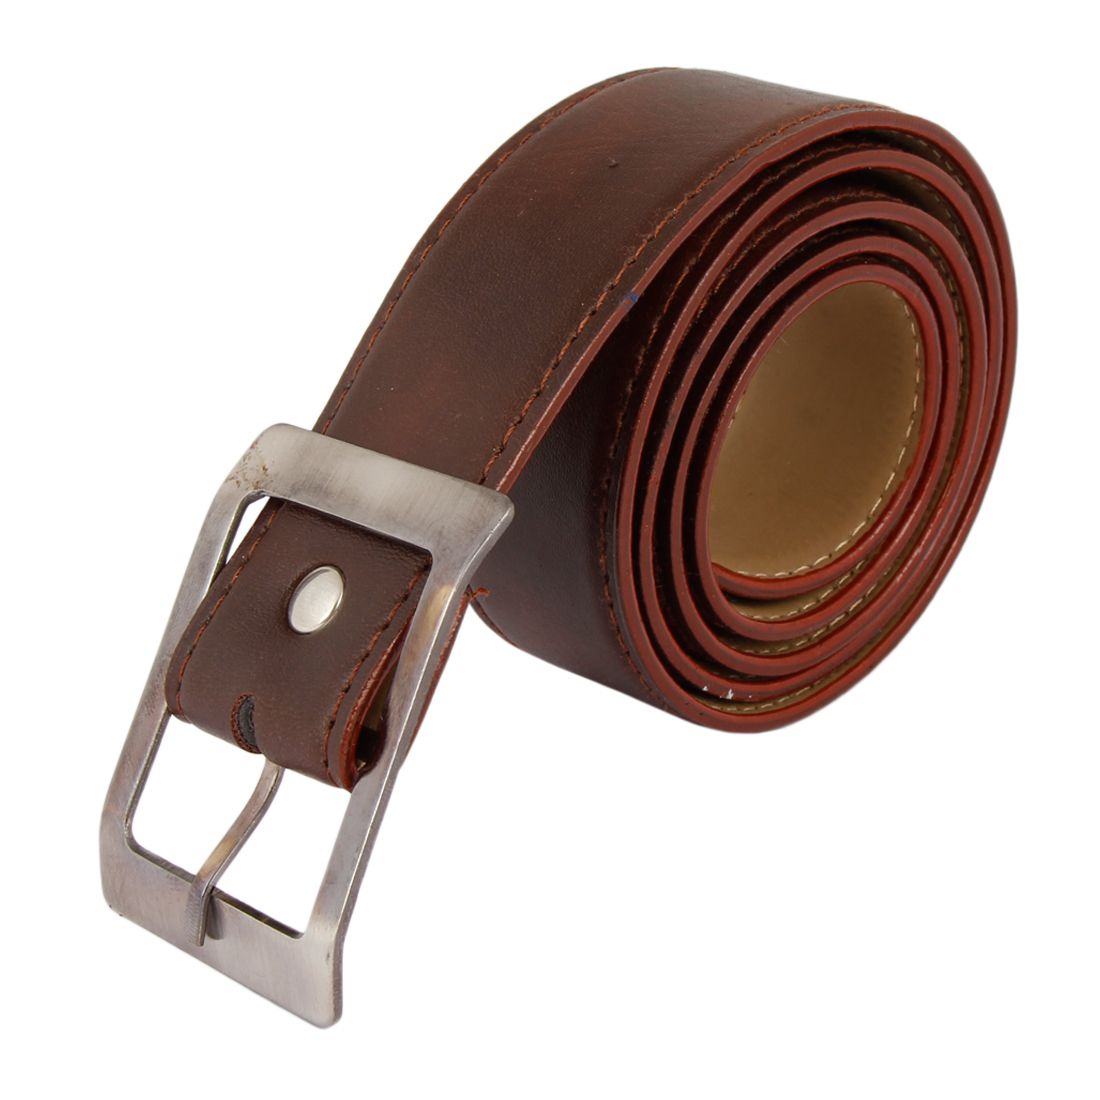 Lurap Maroon Faux Leather Casual Belts: Buy Online at Low Price in ...